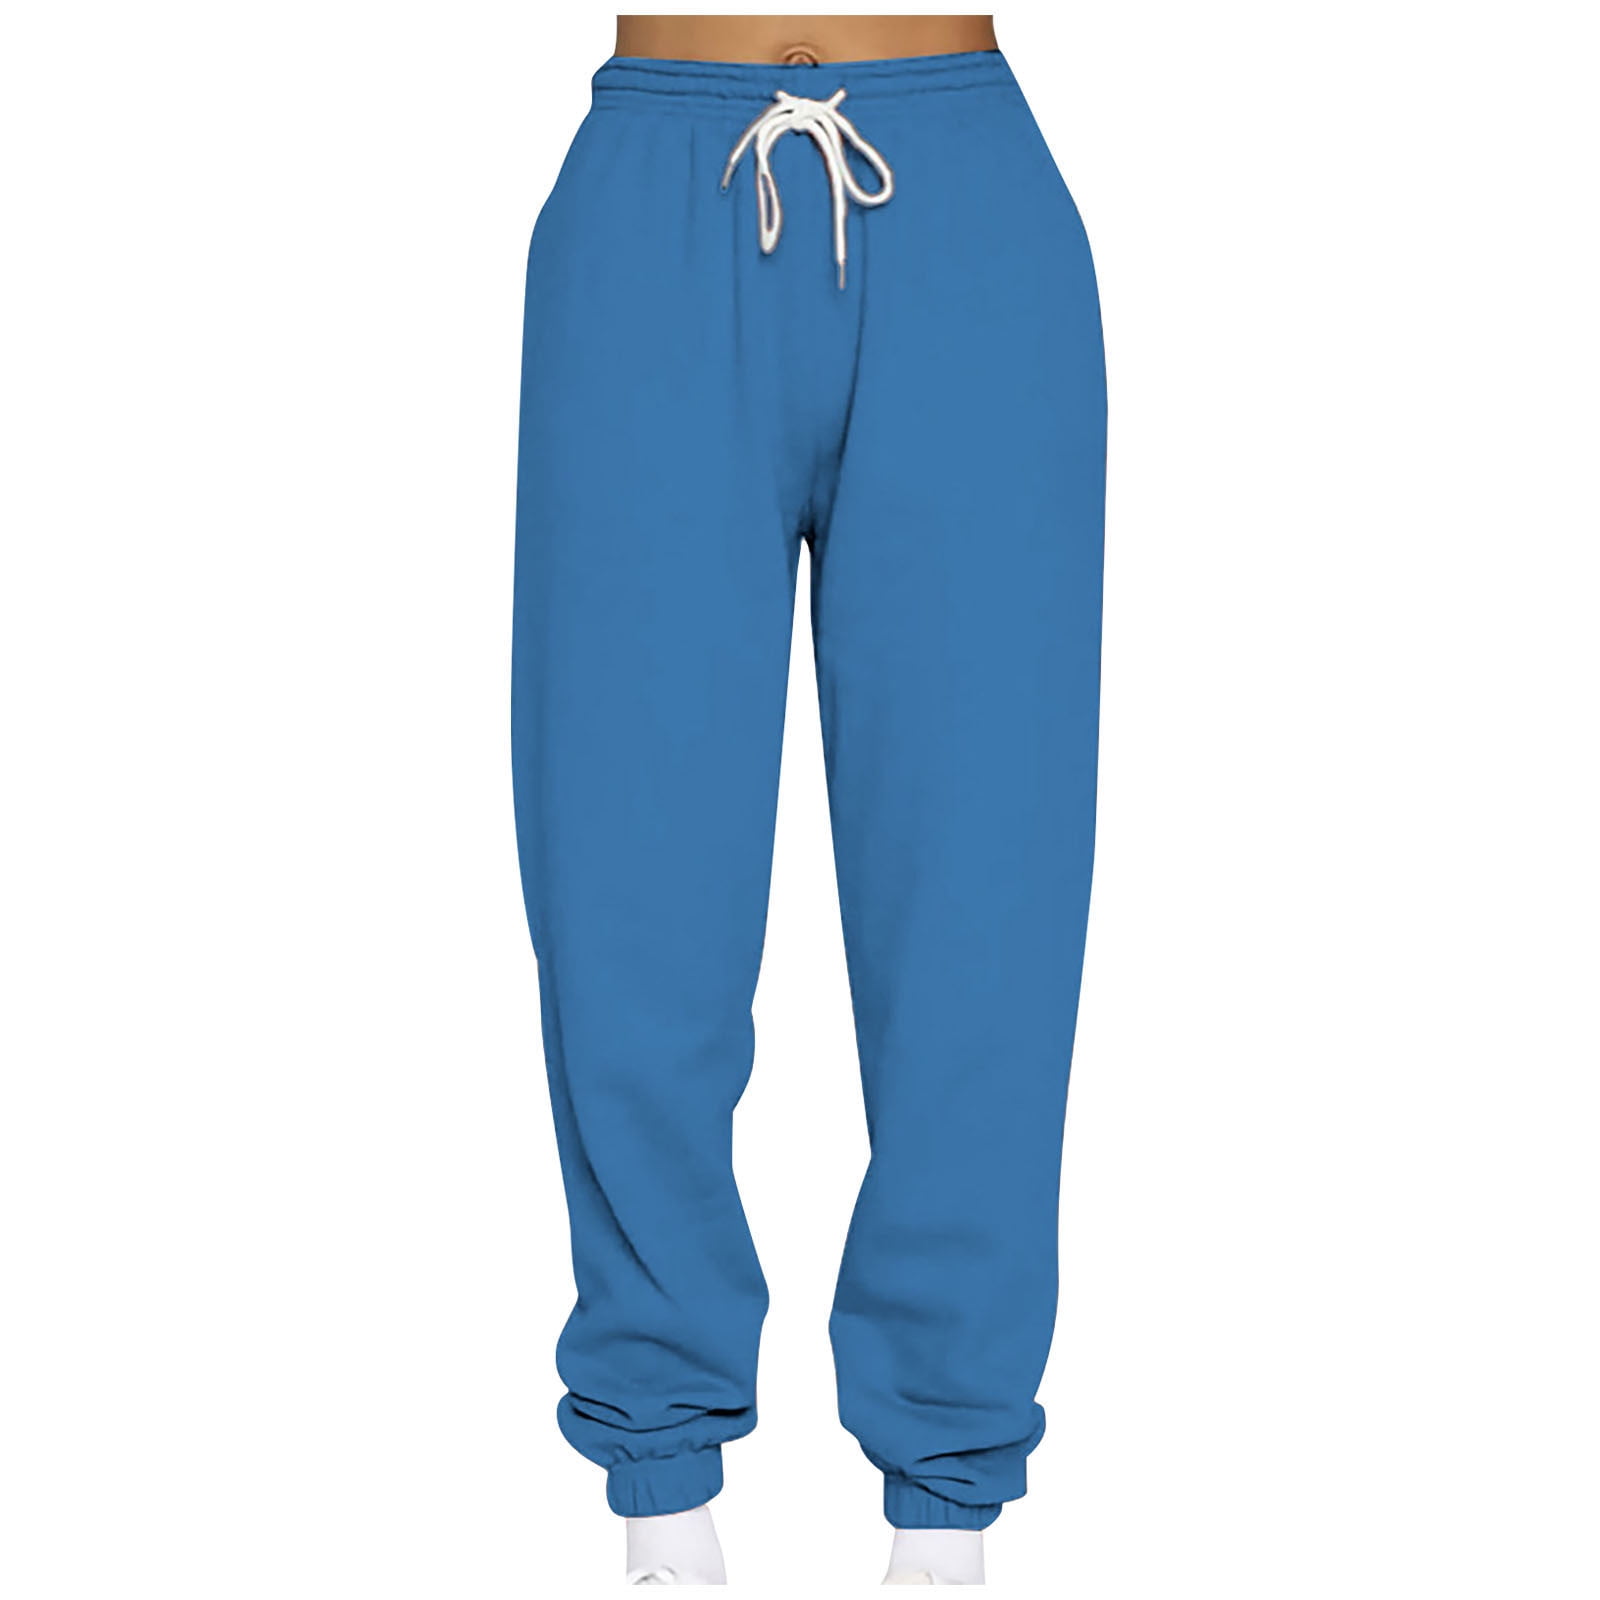 Olyvenn Women's Casual Loose Sports Sweatpants Ankle Banded Trousers ...